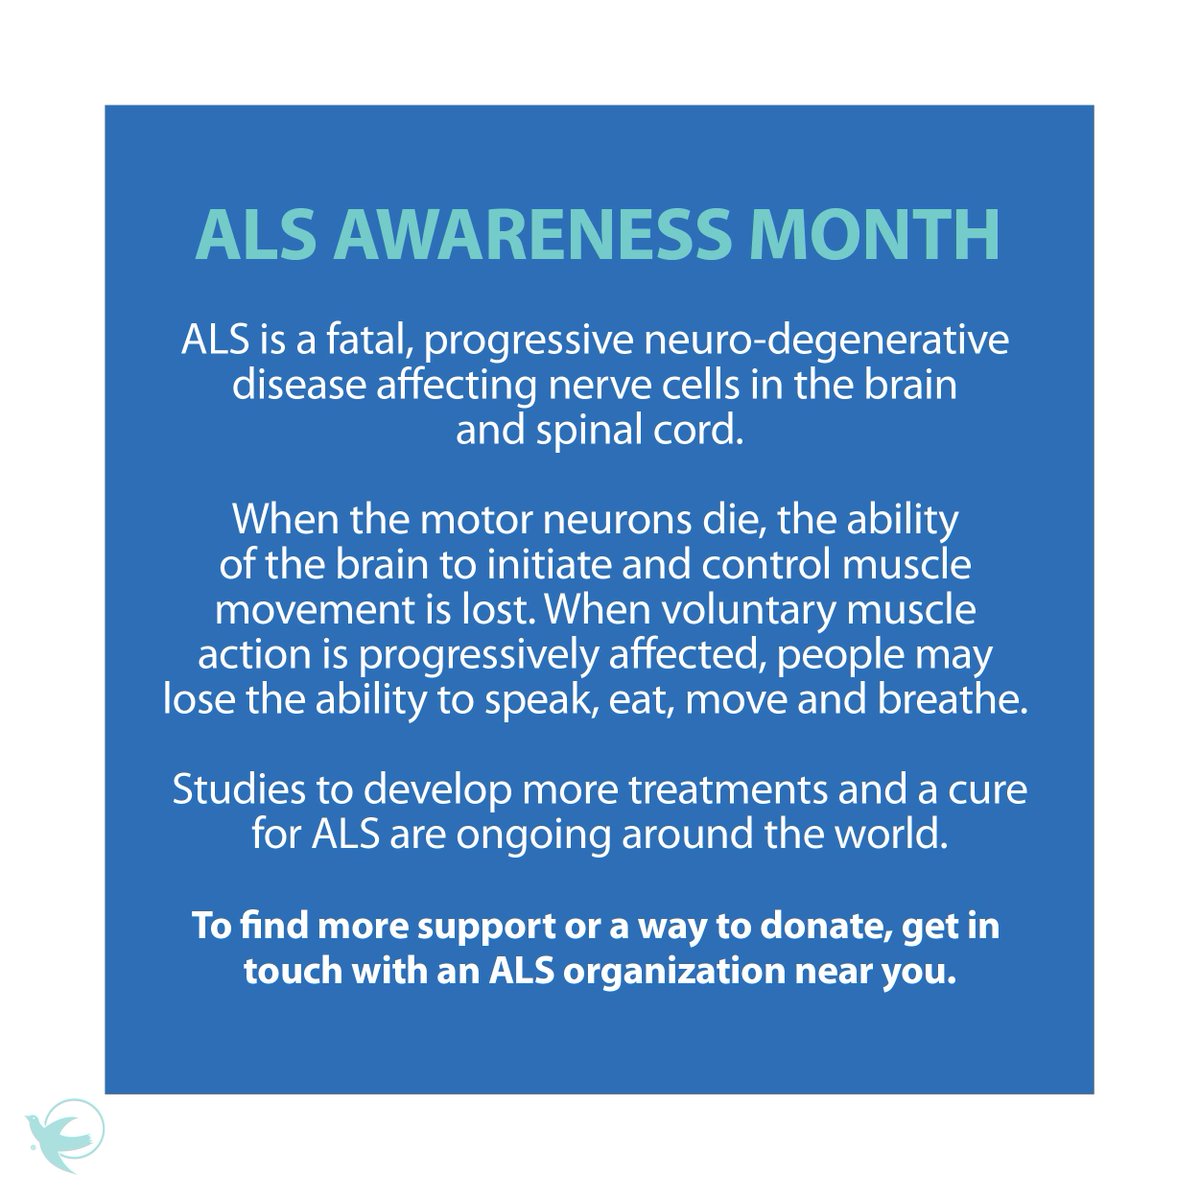 Living with amyotrophic lateral sclerosis (ALS) is a challenge. But together, we can make it easier. #ALS #HopeAndStrength